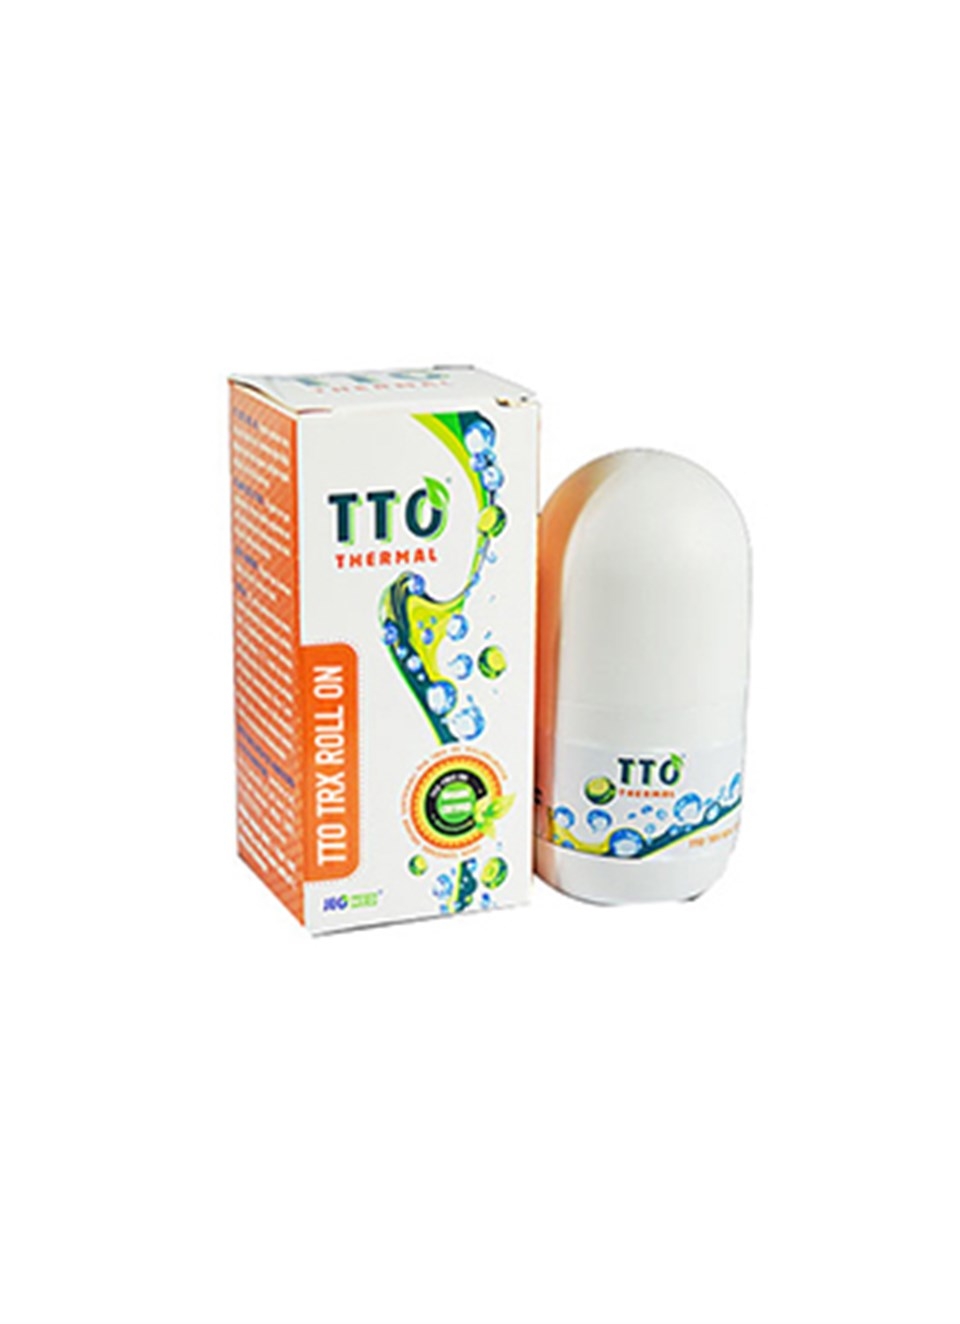 TTO Thermal TRX Roll-On 45 ml - 1